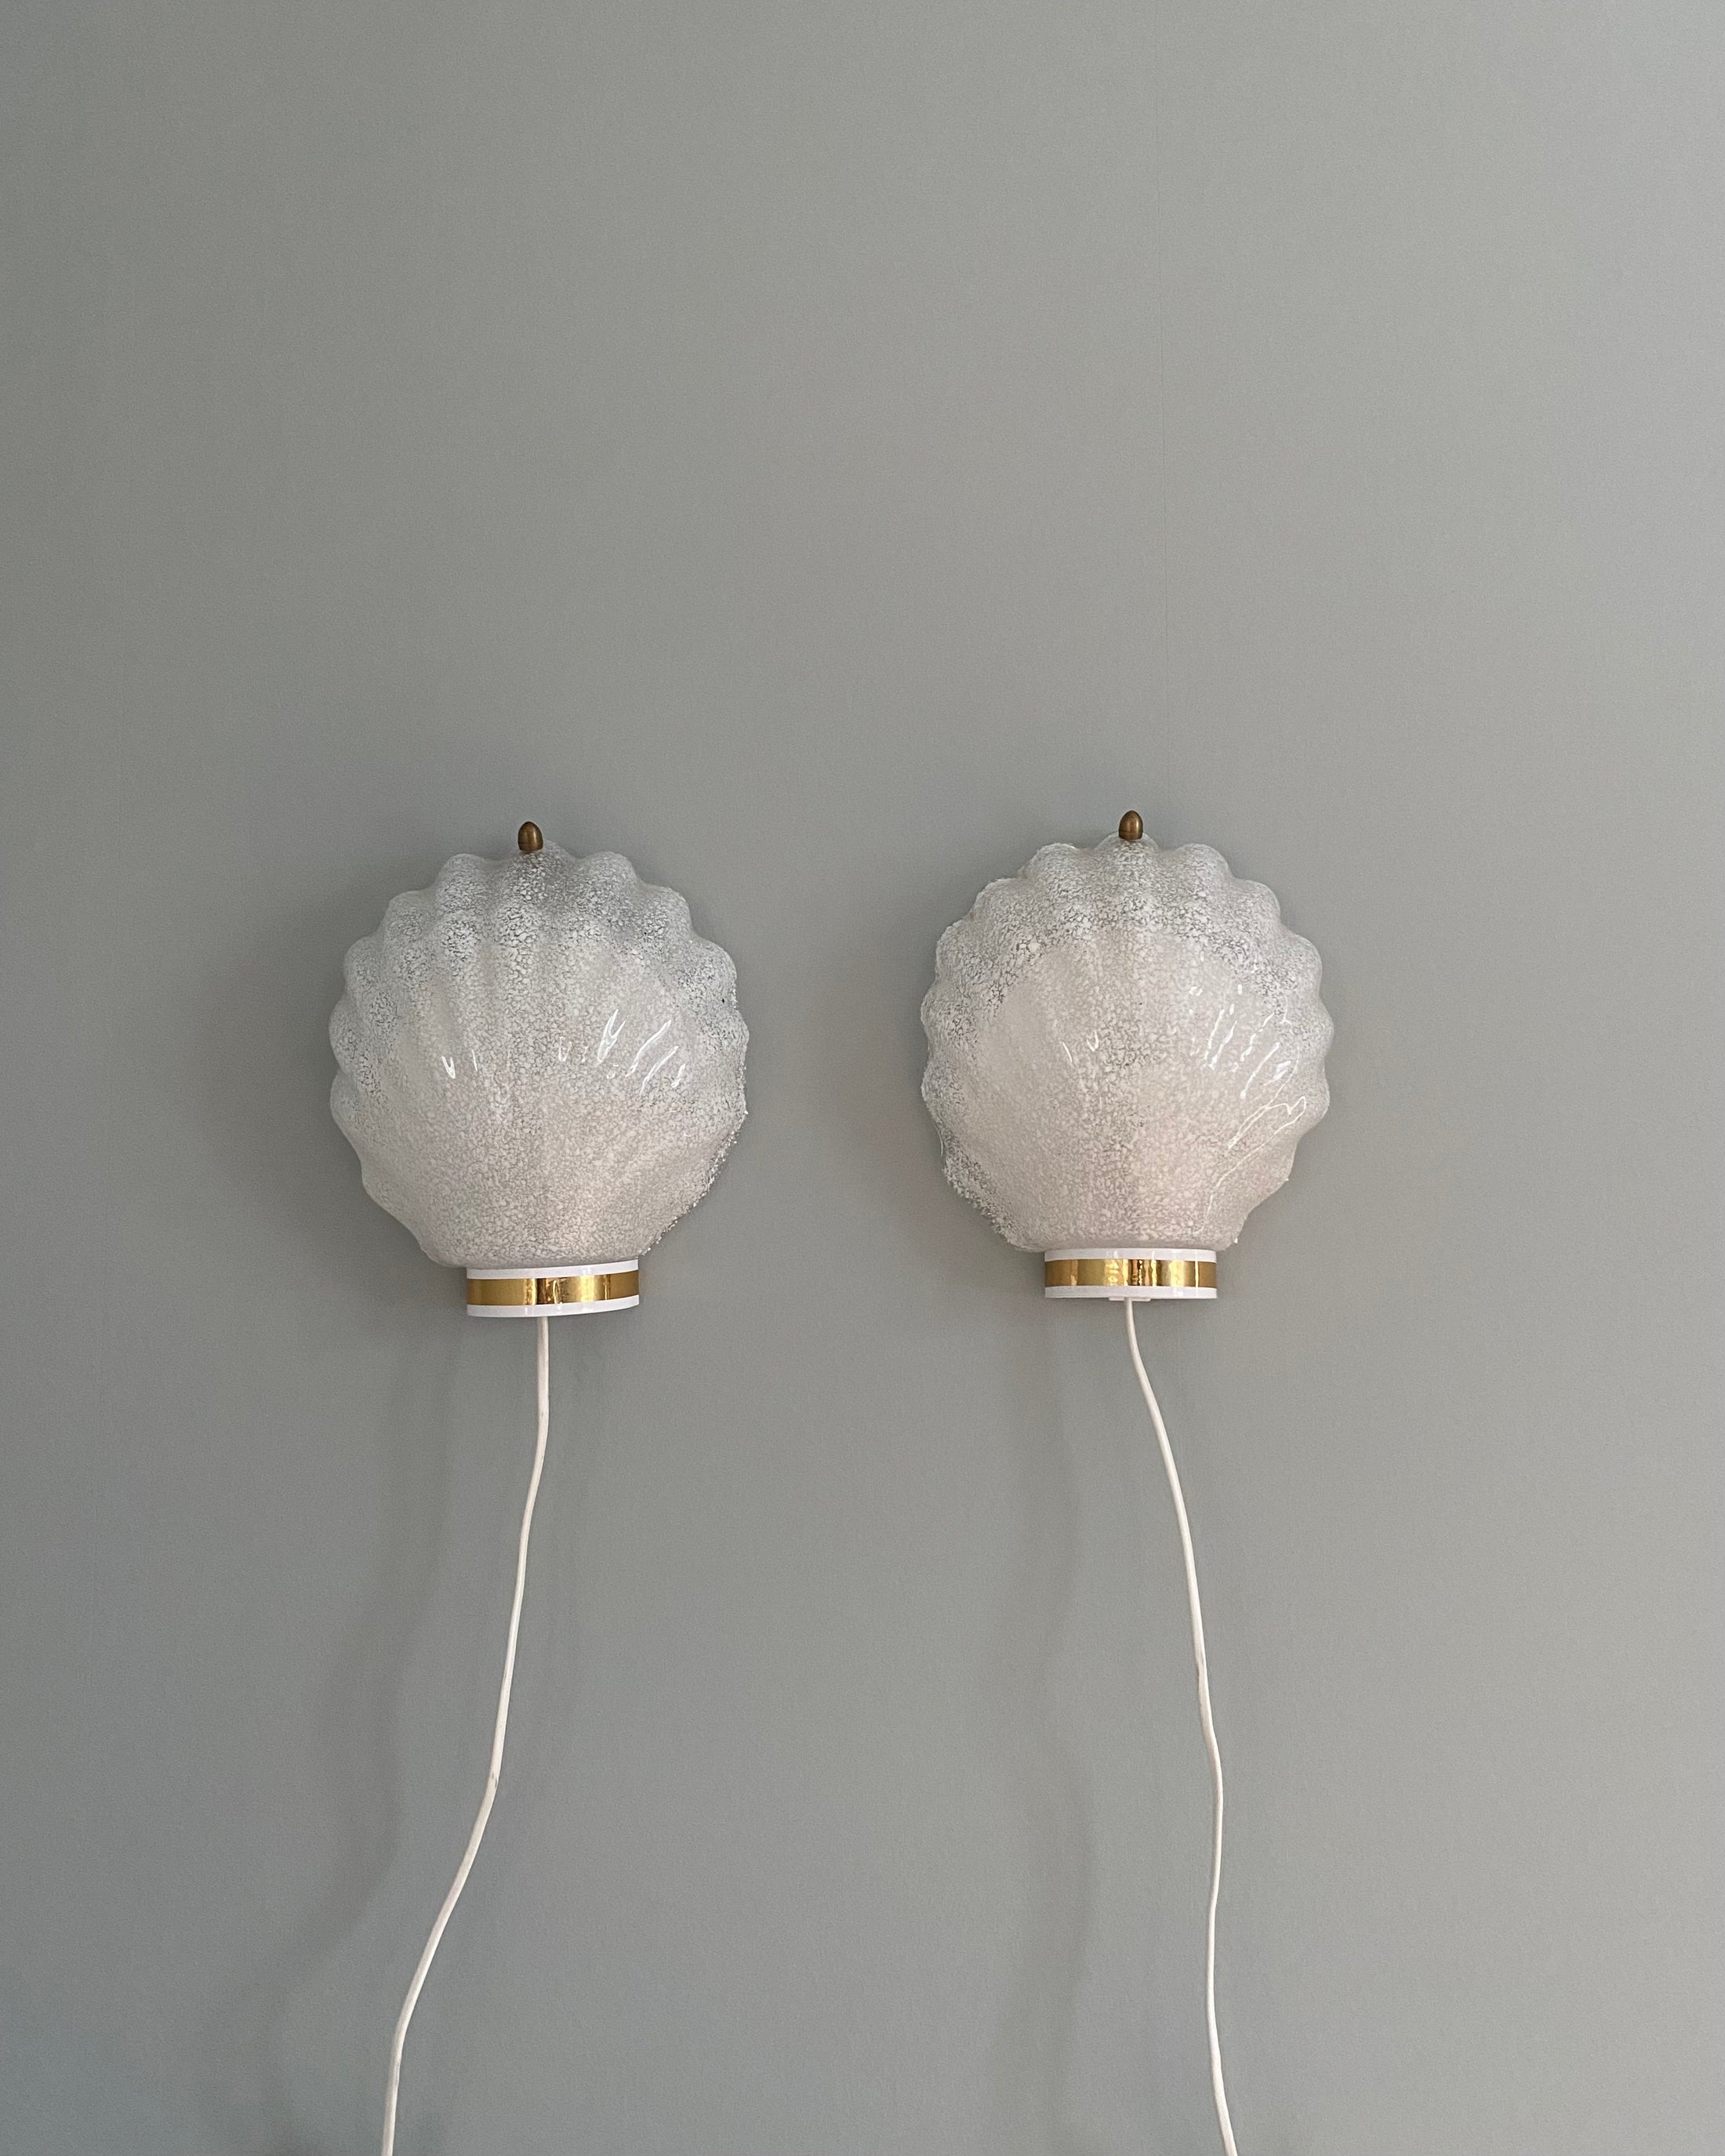 Pair of wall lights